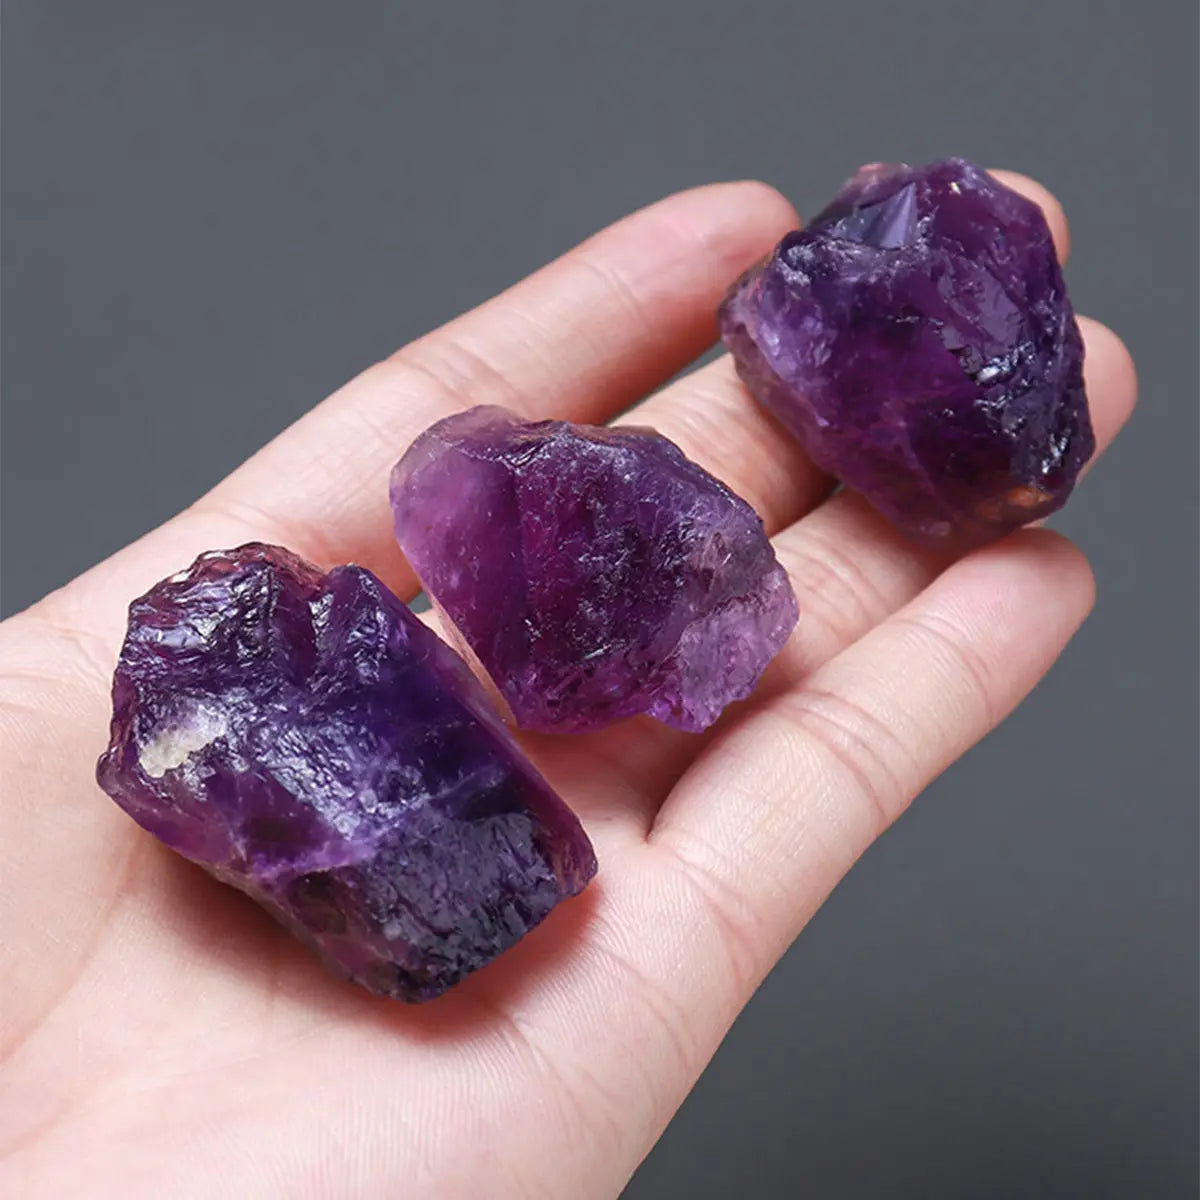 Raw Gemstones for DIY, Home, Office & Fish Tank Decoration 3-4cm Healing Crystal Home